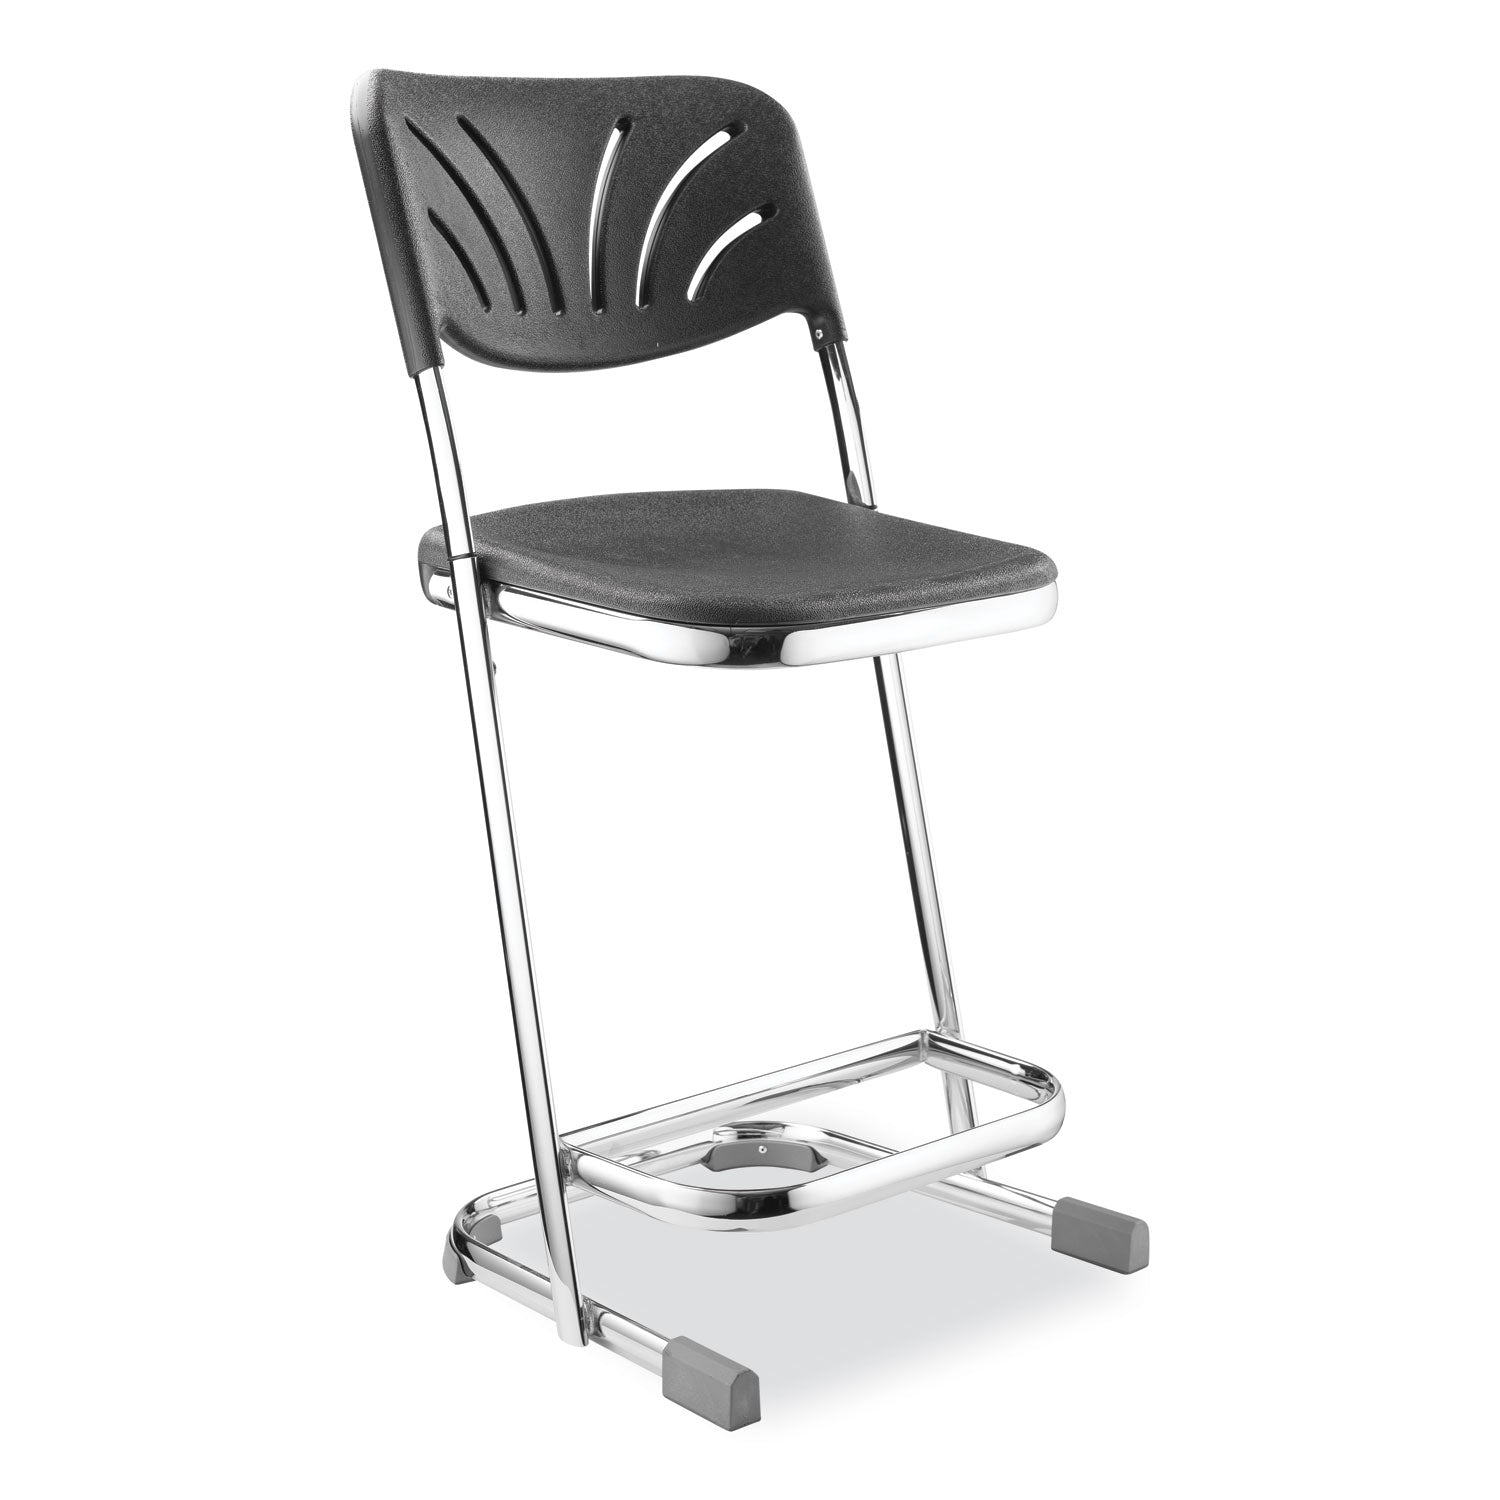 6600-series-elephant-z-stool-with-backrest-supports-500-lb-22-seat-ht-black-seat-back-chrome-frameships-in-1-3-bus-days_nps6622b - 1